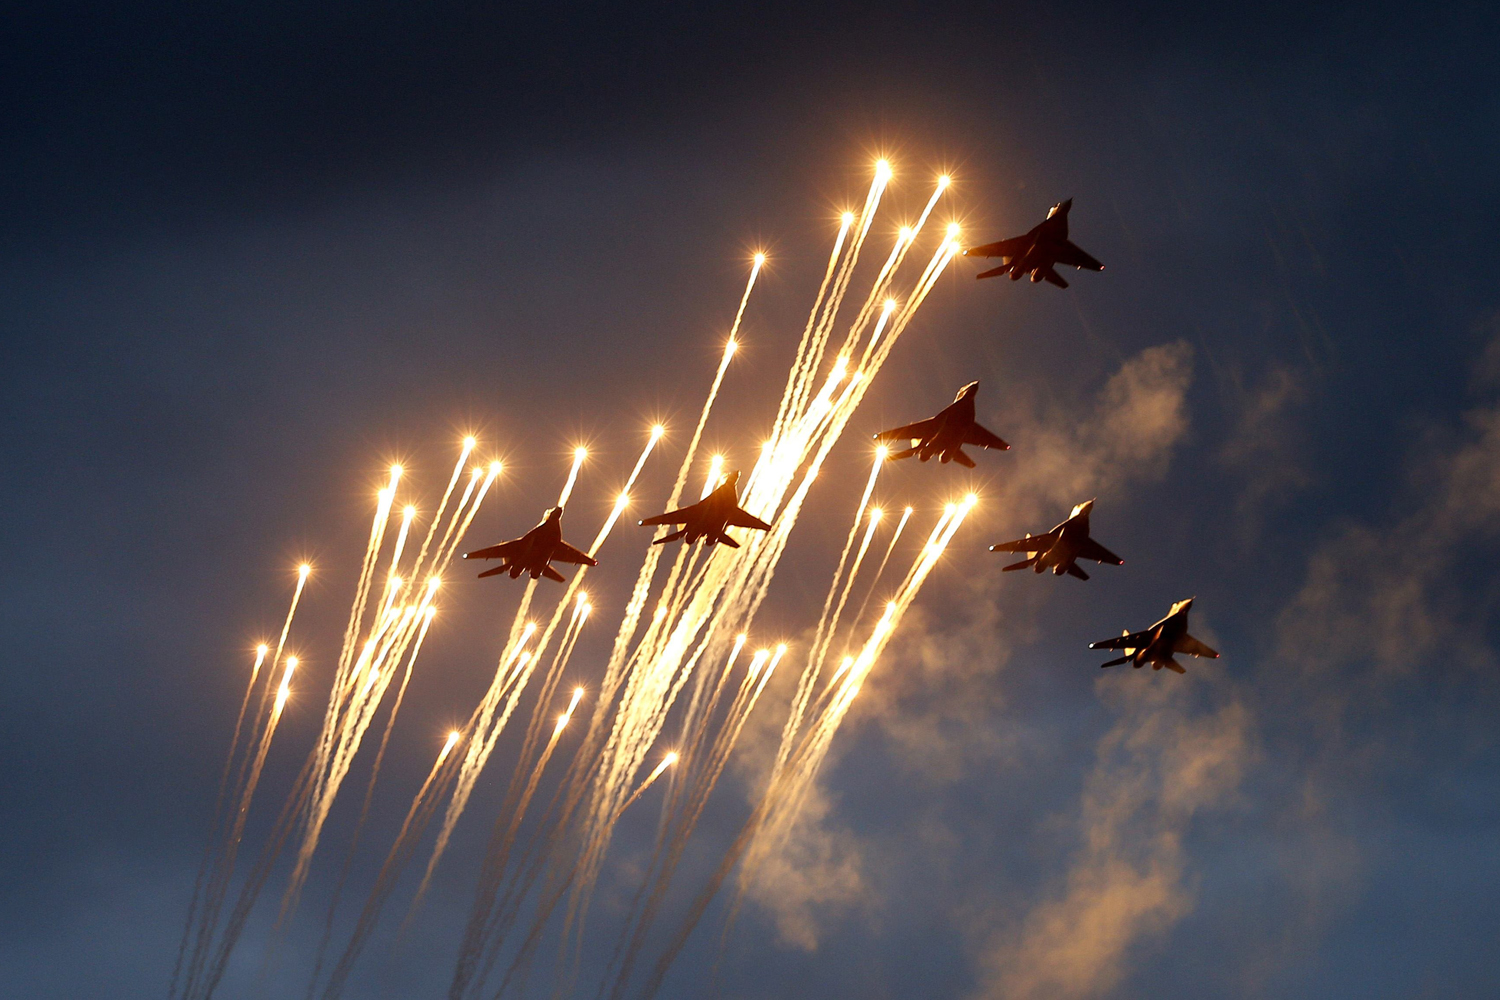 Belarussian MiG-29 jet fighters take part in a rehearsal for a military parade in Minsk